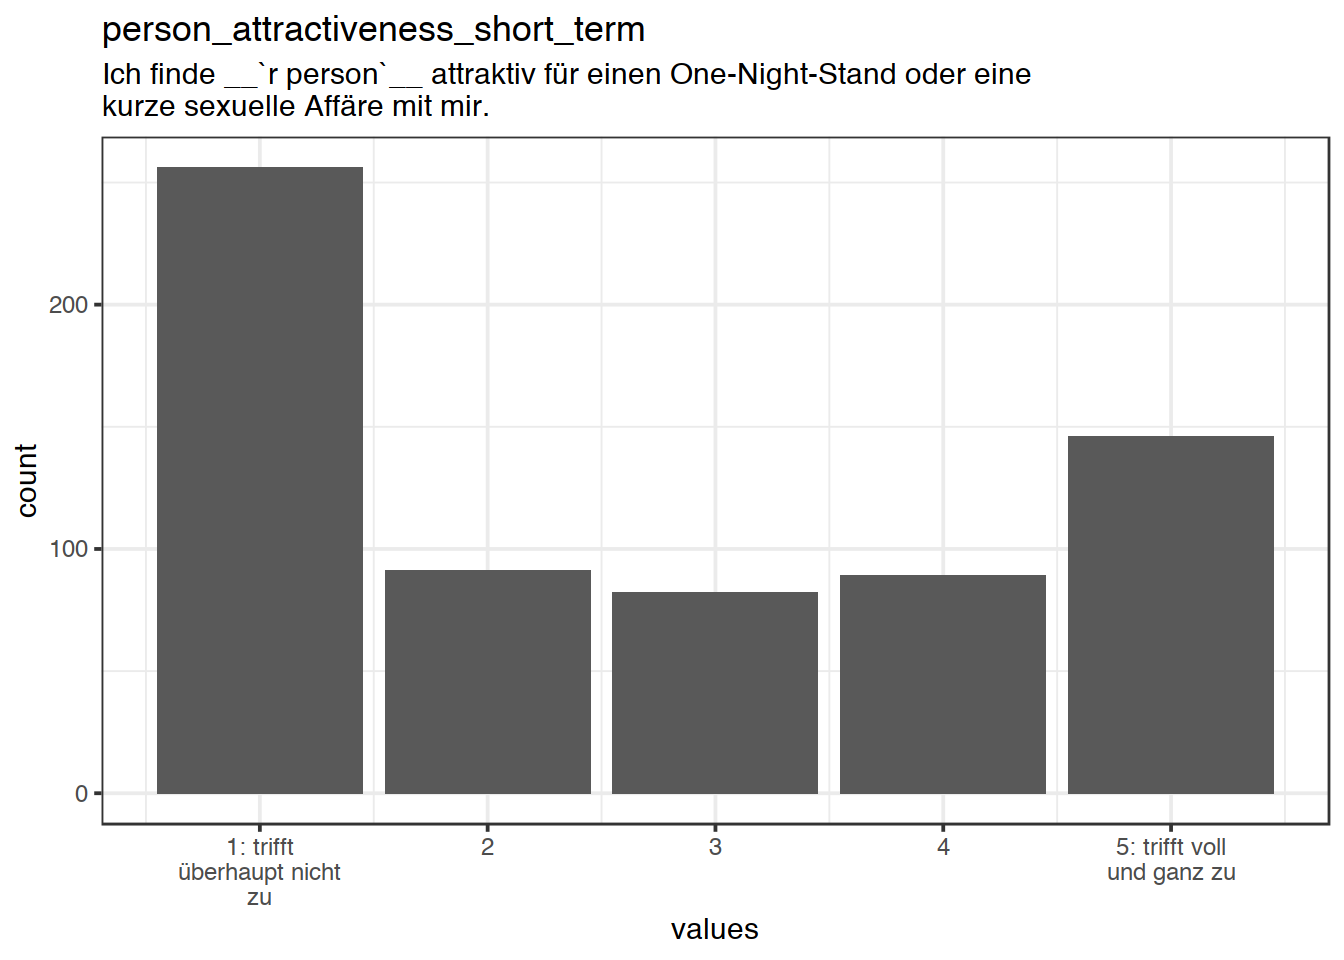 Distribution of values for person_attractiveness_short_term